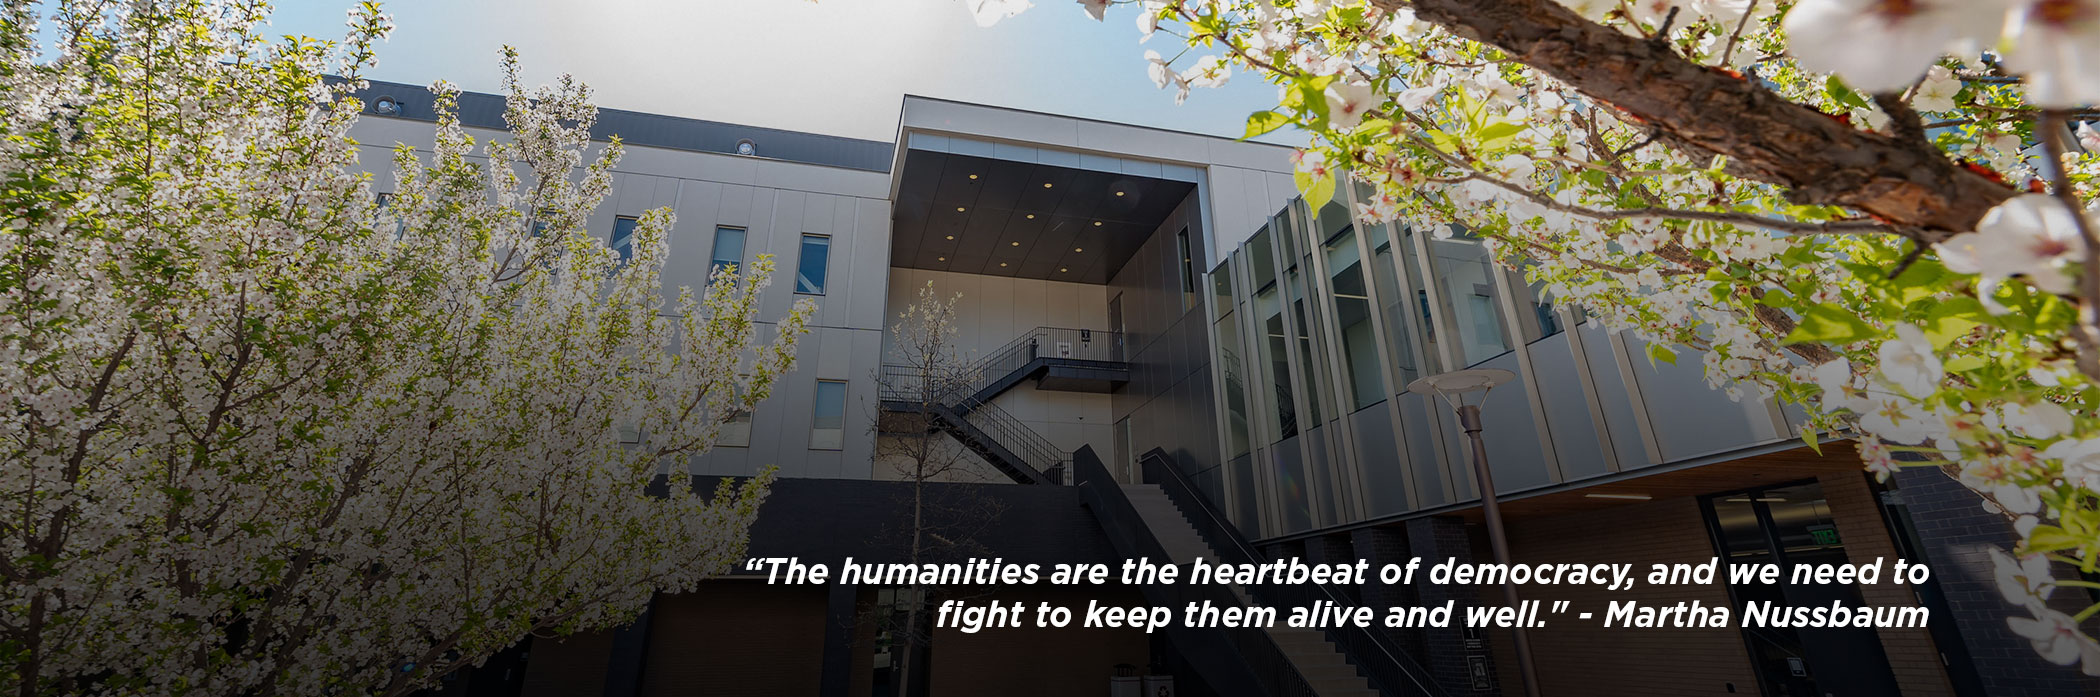 “The humanities are the heartbeat of democracy, and we need to fight to keep the